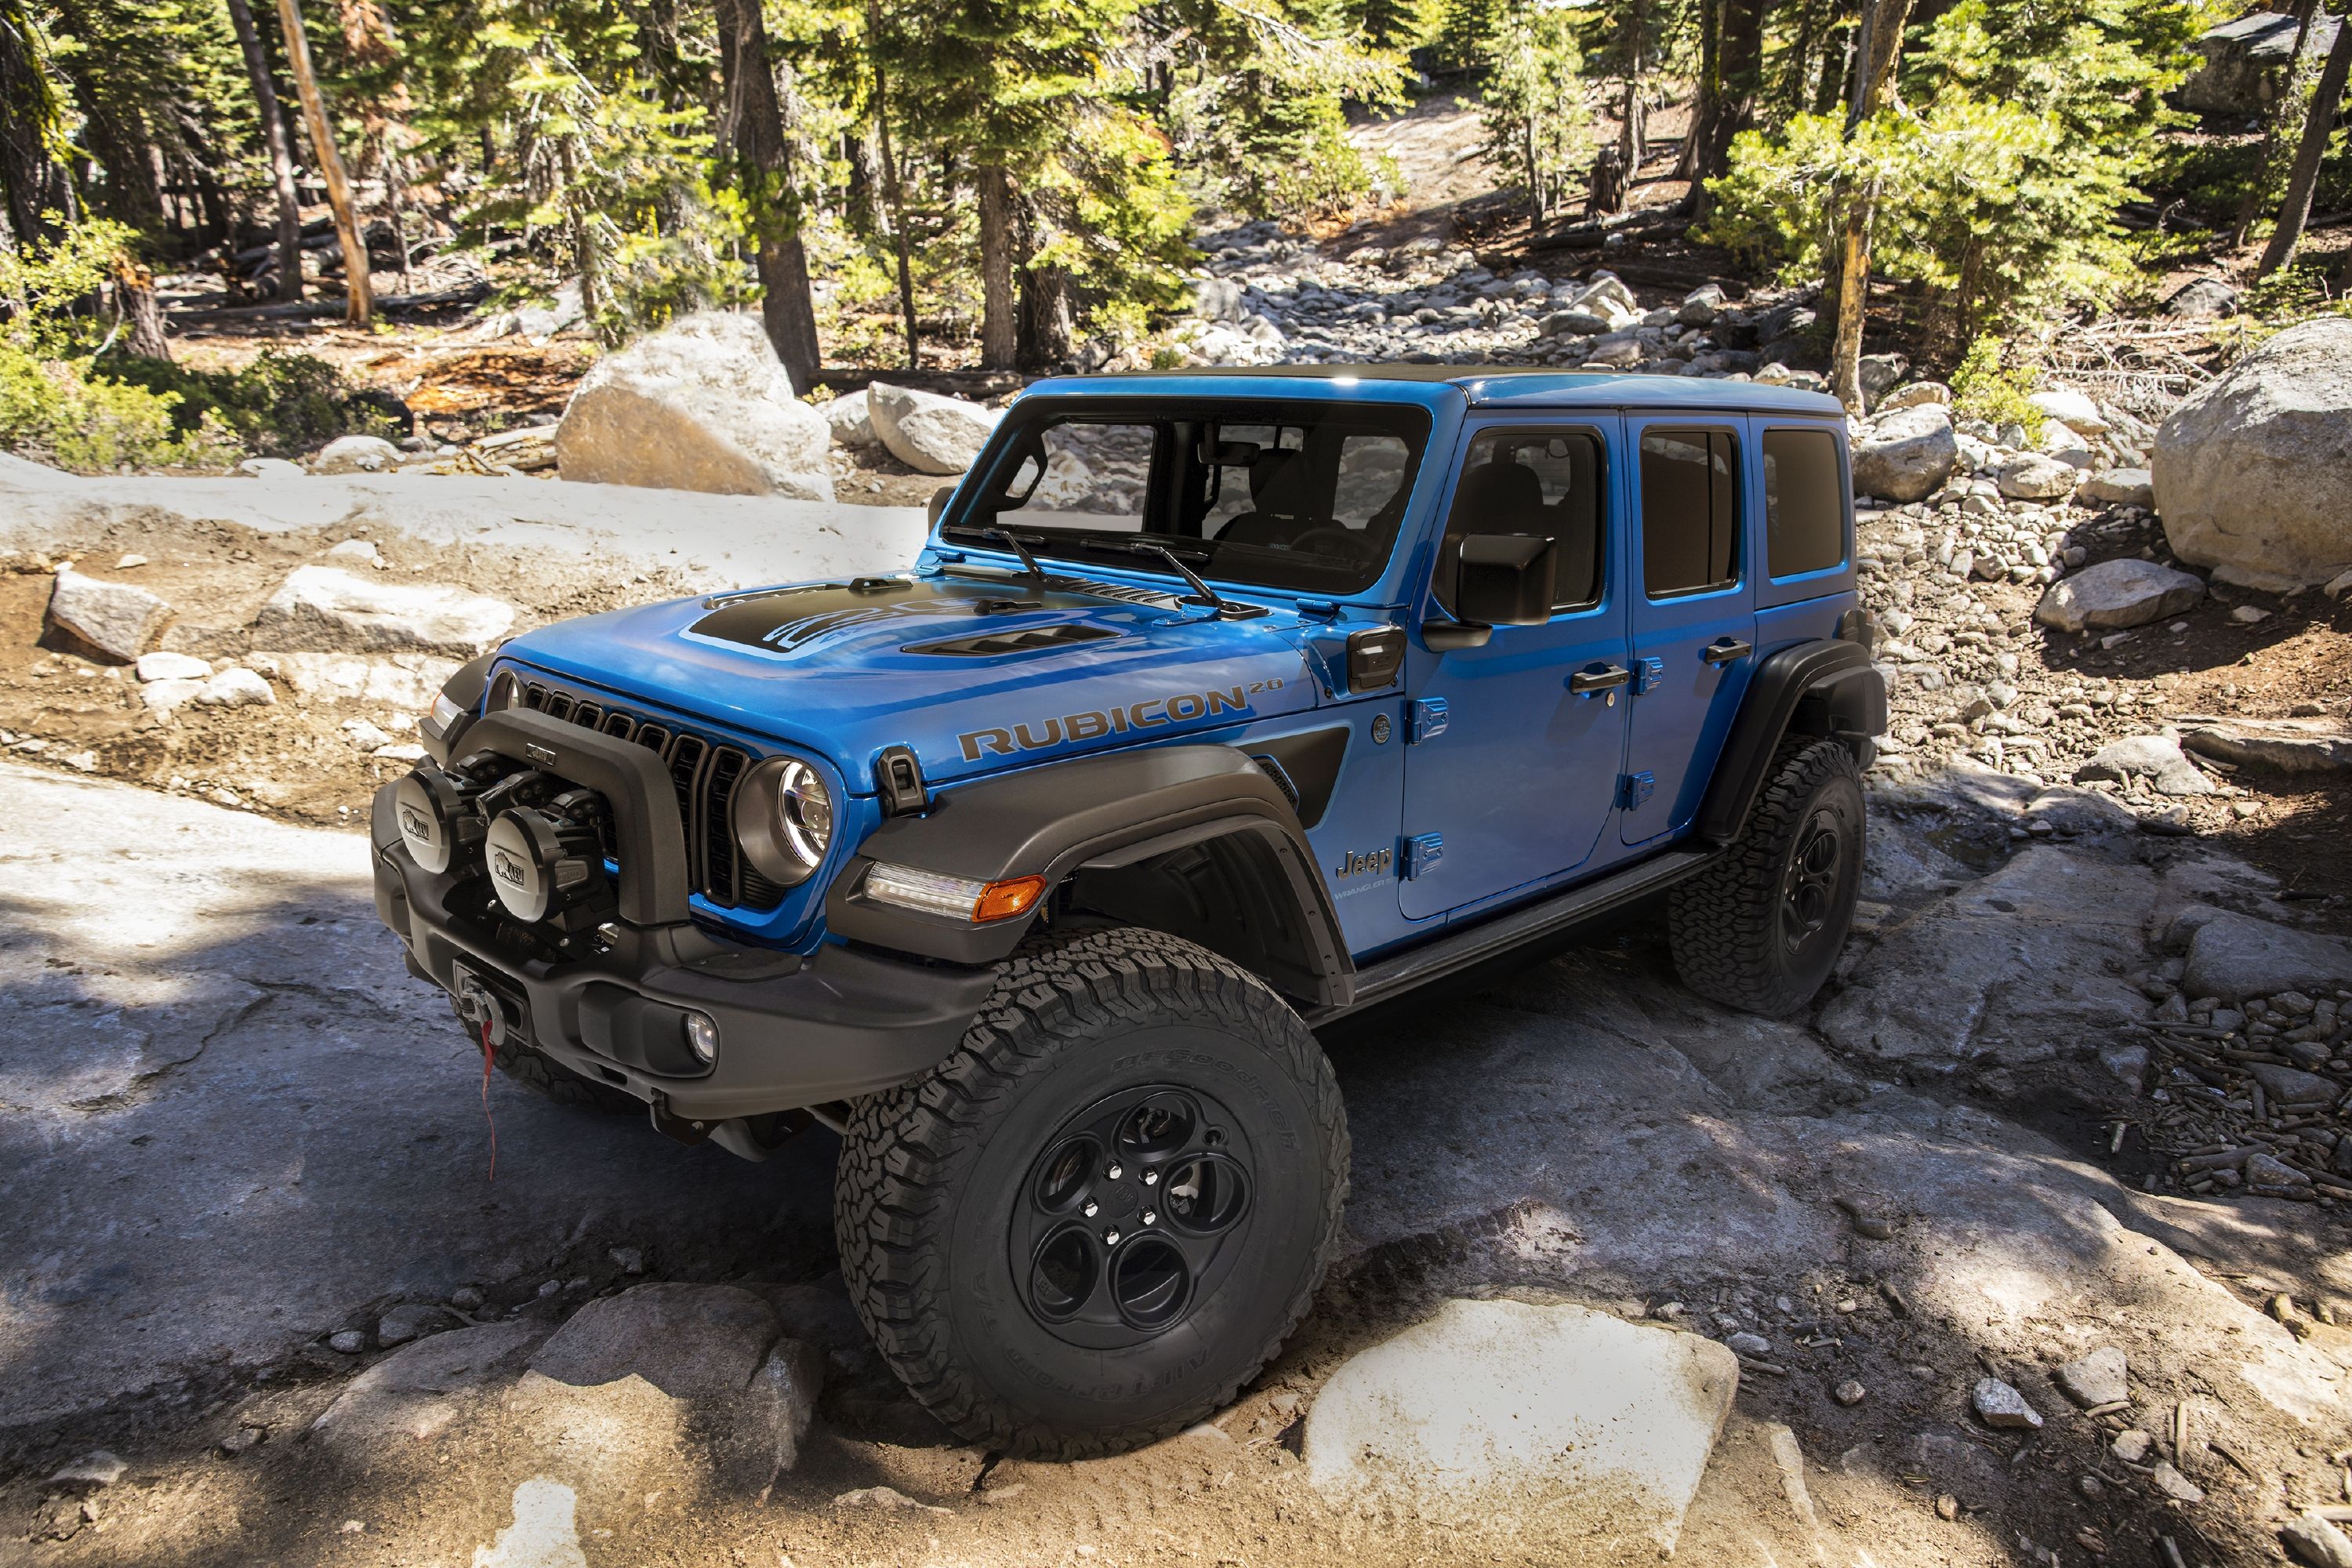 Jeep Shows Two Anniversary Edition Wrangler Rubicons in Chicago